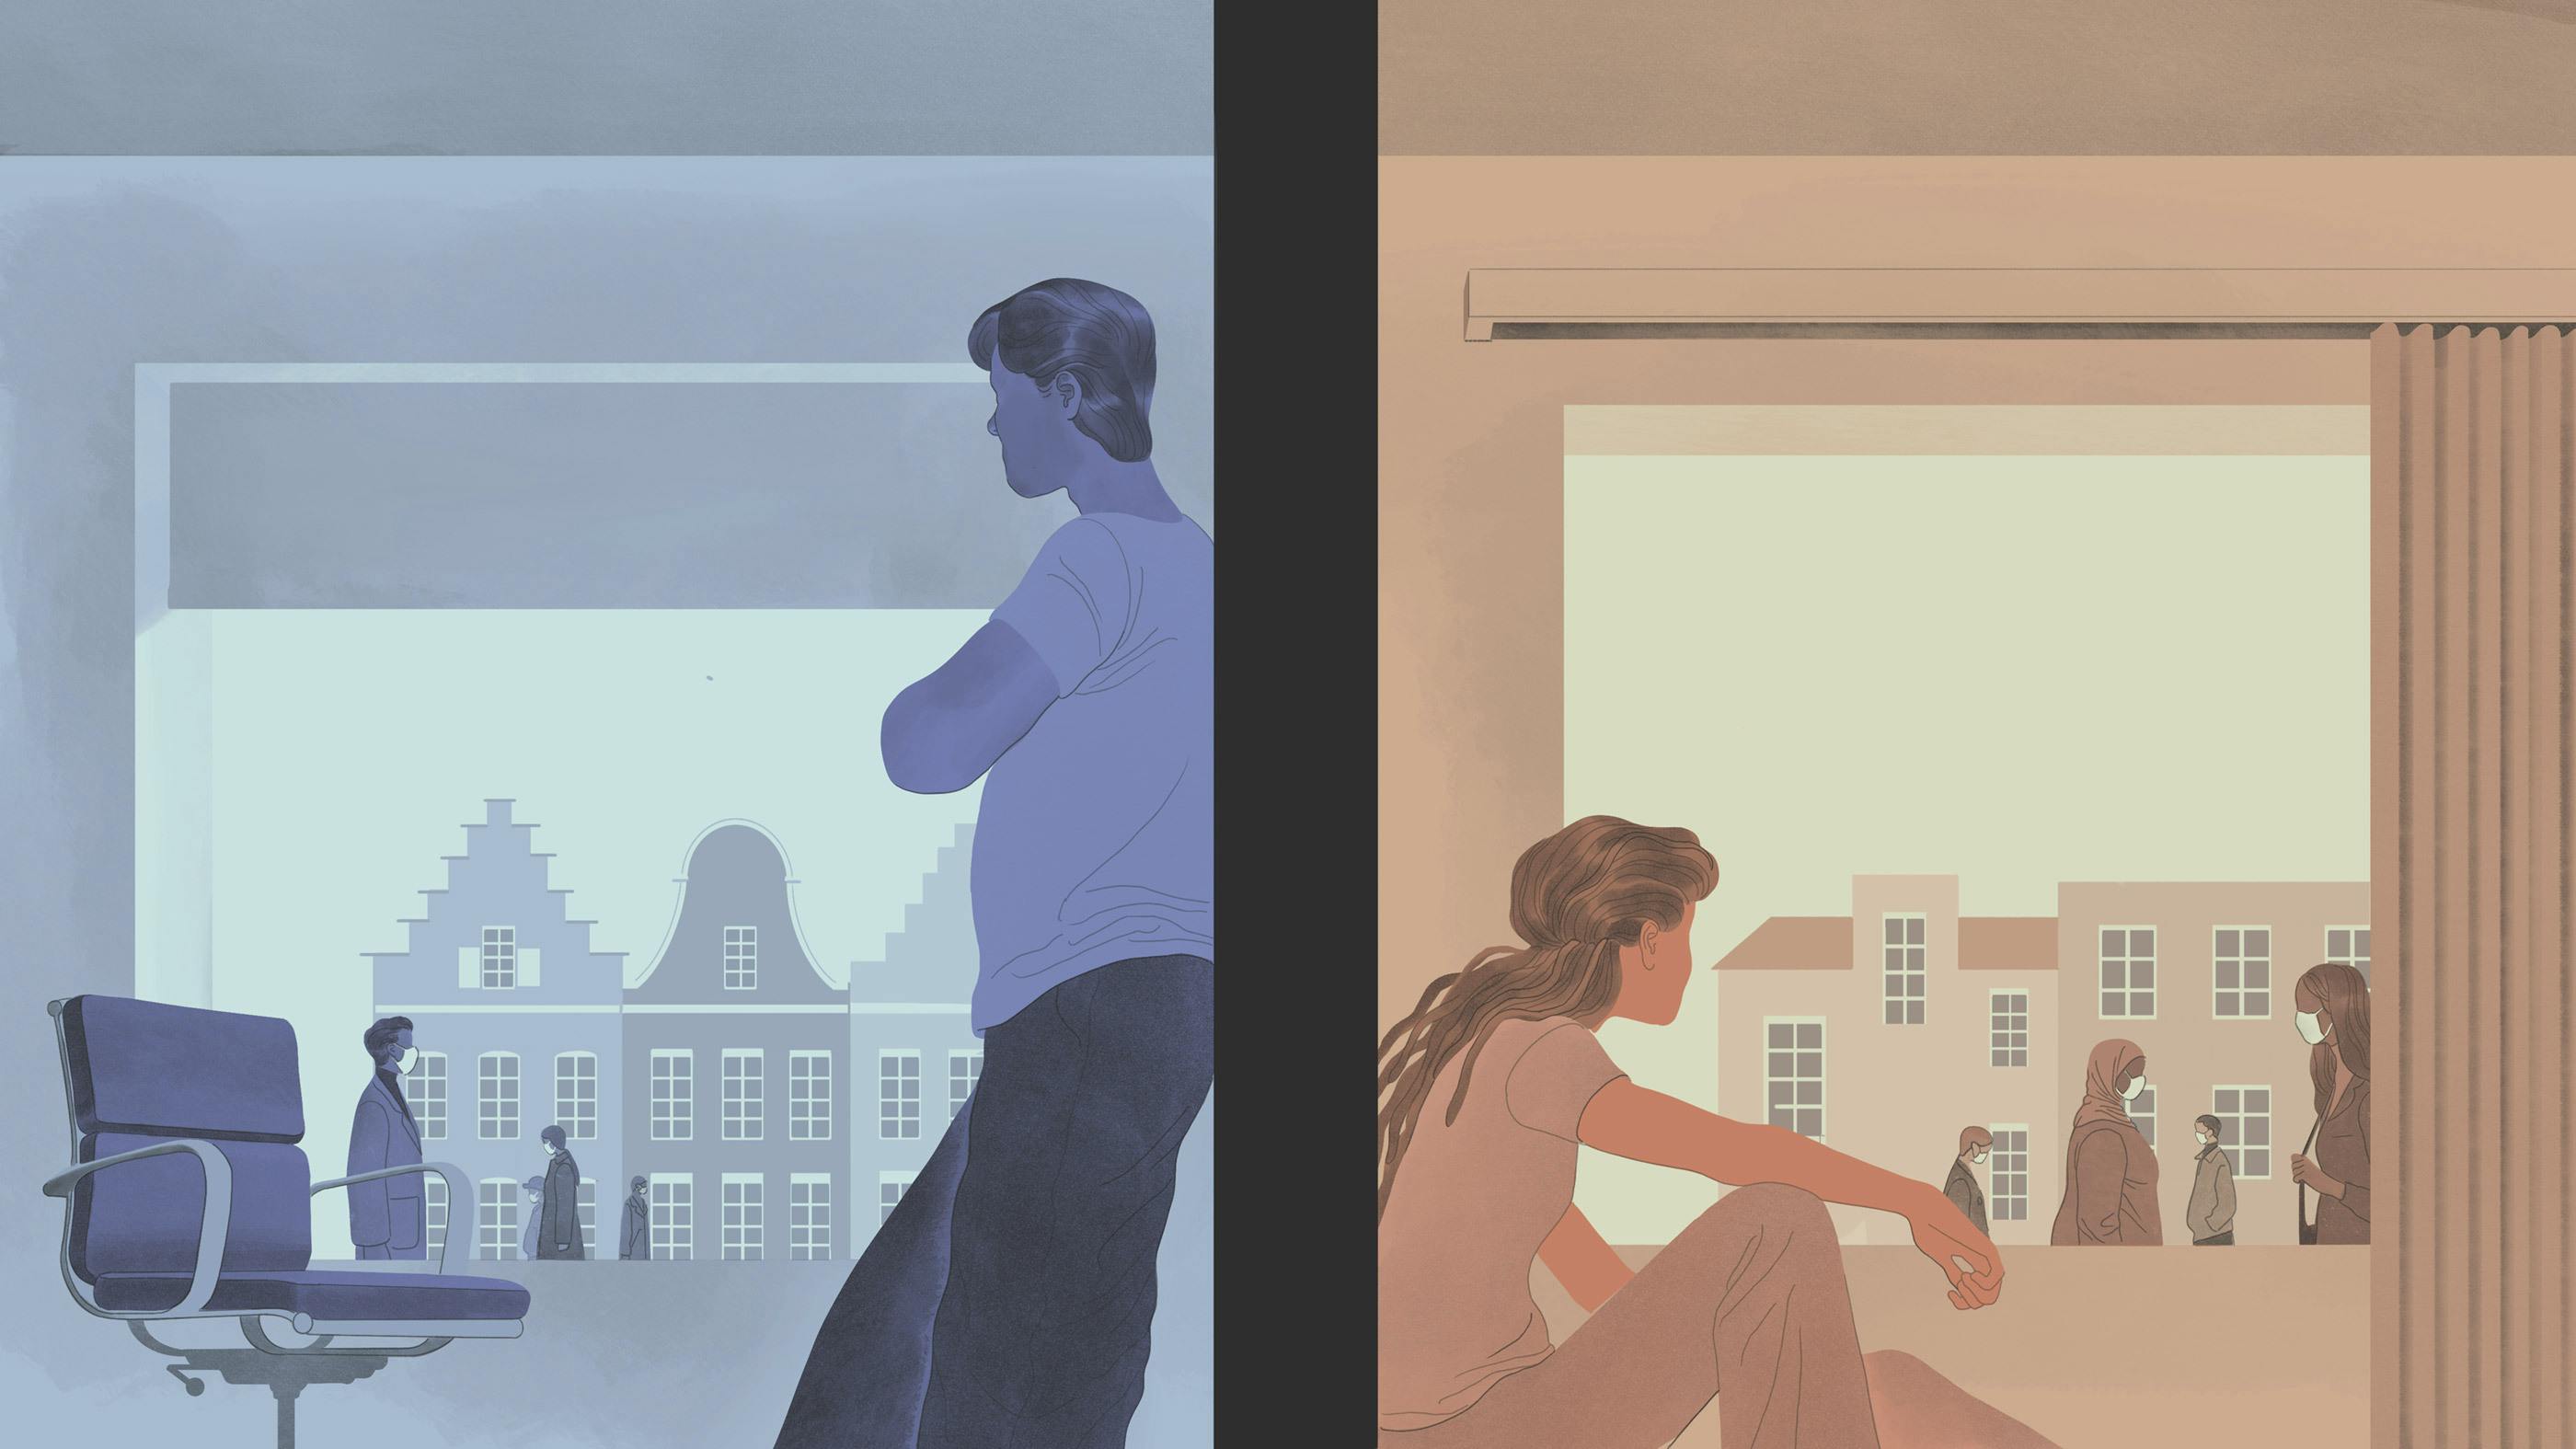 Man and woman, on opposite sides, both leaning against a wall in center of the image. Illustration by Jun Cen for part 7